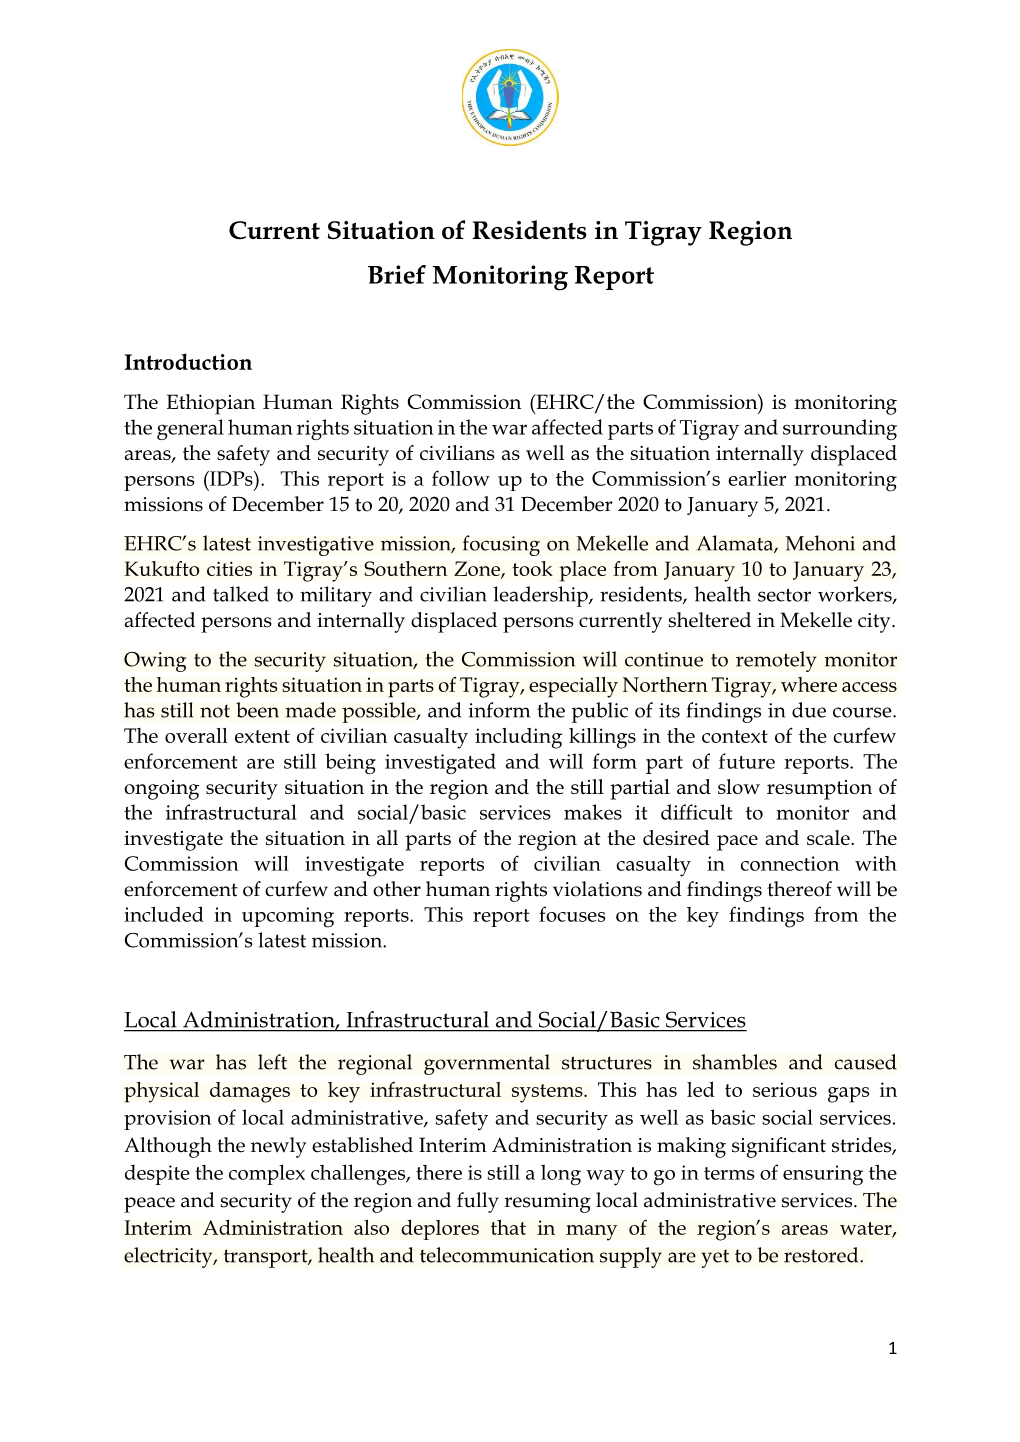 Current Situation of Residents in Tigray Region Brief Monitoring Report